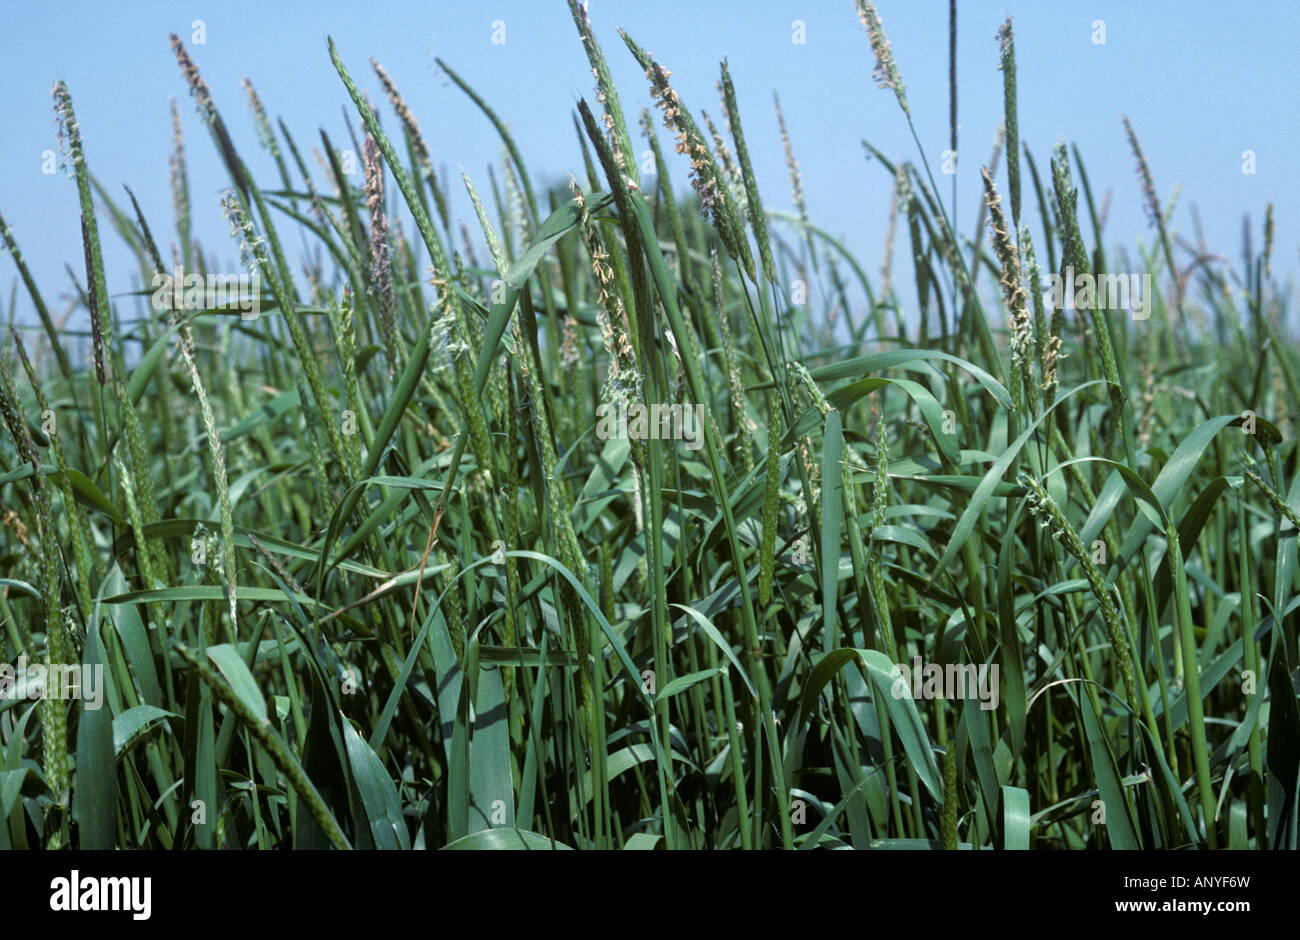 Flowering blackgrass Alopecurus myosuroides annual arable grass weeds in maturing wheat Stock Photo